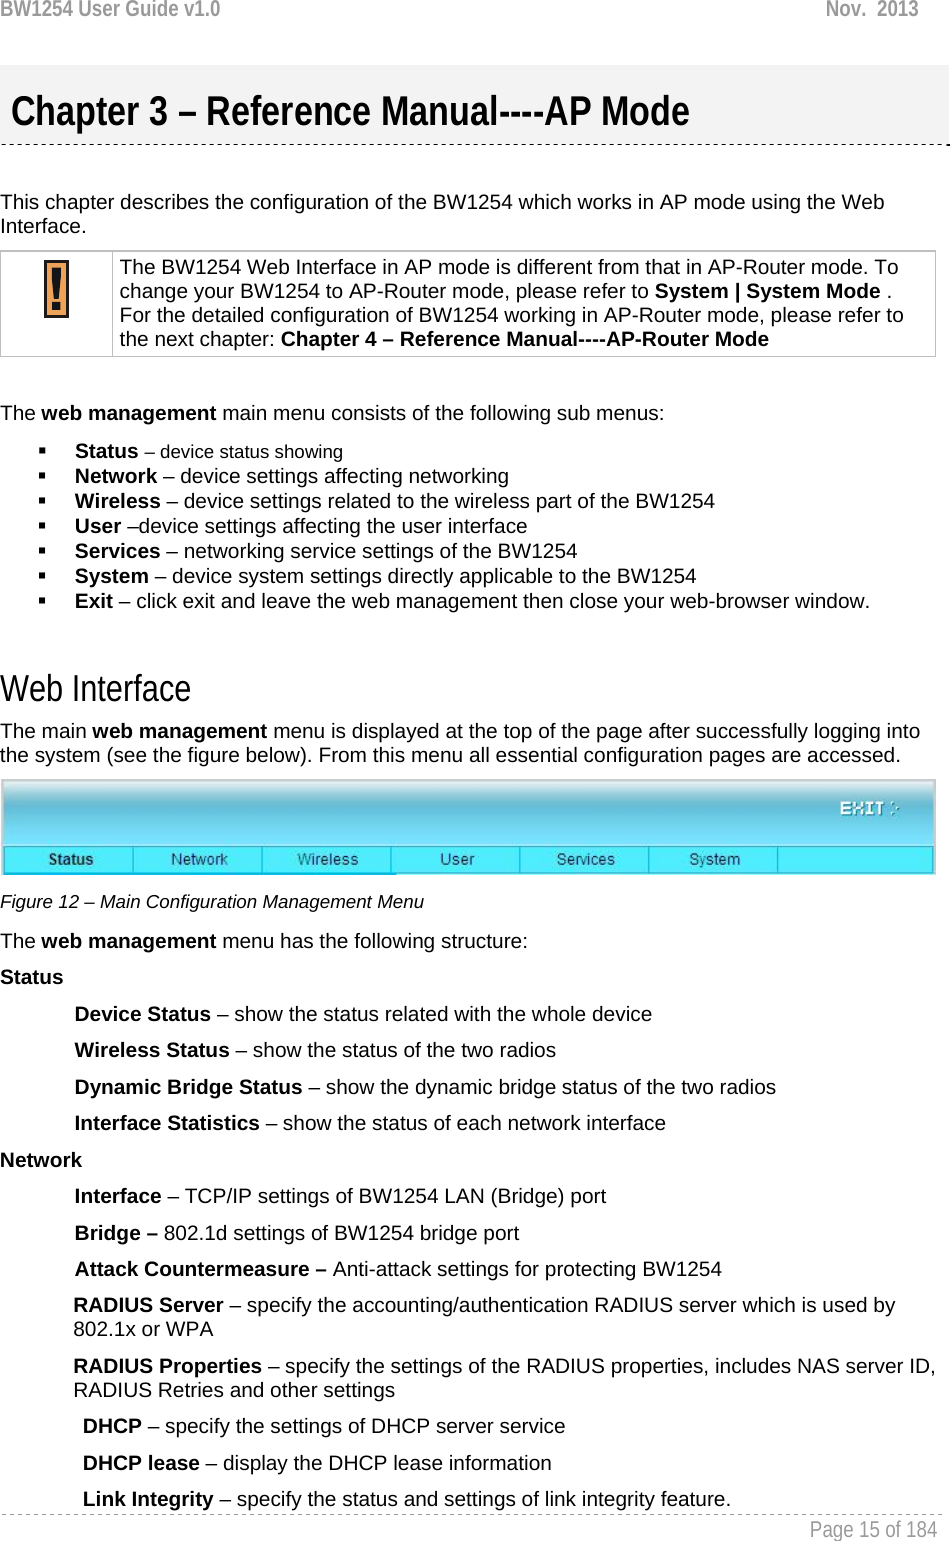 BW1254 User Guide v1.0  Nov.  2013     Page 15 of 184    This chapter describes the configuration of the BW1254 which works in AP mode using the Web Interface.  The BW1254 Web Interface in AP mode is different from that in AP-Router mode. To change your BW1254 to AP-Router mode, please refer to System | System Mode . For the detailed configuration of BW1254 working in AP-Router mode, please refer to the next chapter: Chapter 4 – Reference Manual----AP-Router Mode  The web management main menu consists of the following sub menus:  Status – device status showing  Network – device settings affecting networking  Wireless – device settings related to the wireless part of the BW1254  User –device settings affecting the user interface  Services – networking service settings of the BW1254  System – device system settings directly applicable to the BW1254  Exit – click exit and leave the web management then close your web-browser window.  Web Interface The main web management menu is displayed at the top of the page after successfully logging into the system (see the figure below). From this menu all essential configuration pages are accessed.  Figure 12 – Main Configuration Management Menu The web management menu has the following structure: Status Device Status – show the status related with the whole device Wireless Status – show the status of the two radios Dynamic Bridge Status – show the dynamic bridge status of the two radios Interface Statistics – show the status of each network interface Network  Interface – TCP/IP settings of BW1254 LAN (Bridge) port Bridge – 802.1d settings of BW1254 bridge port Attack Countermeasure – Anti-attack settings for protecting BW1254 RADIUS Server – specify the accounting/authentication RADIUS server which is used by 802.1x or WPA RADIUS Properties – specify the settings of the RADIUS properties, includes NAS server ID, RADIUS Retries and other settings DHCP – specify the settings of DHCP server service DHCP lease – display the DHCP lease information Link Integrity – specify the status and settings of link integrity feature.  Chapter 3 – Reference Manual----AP Mode 